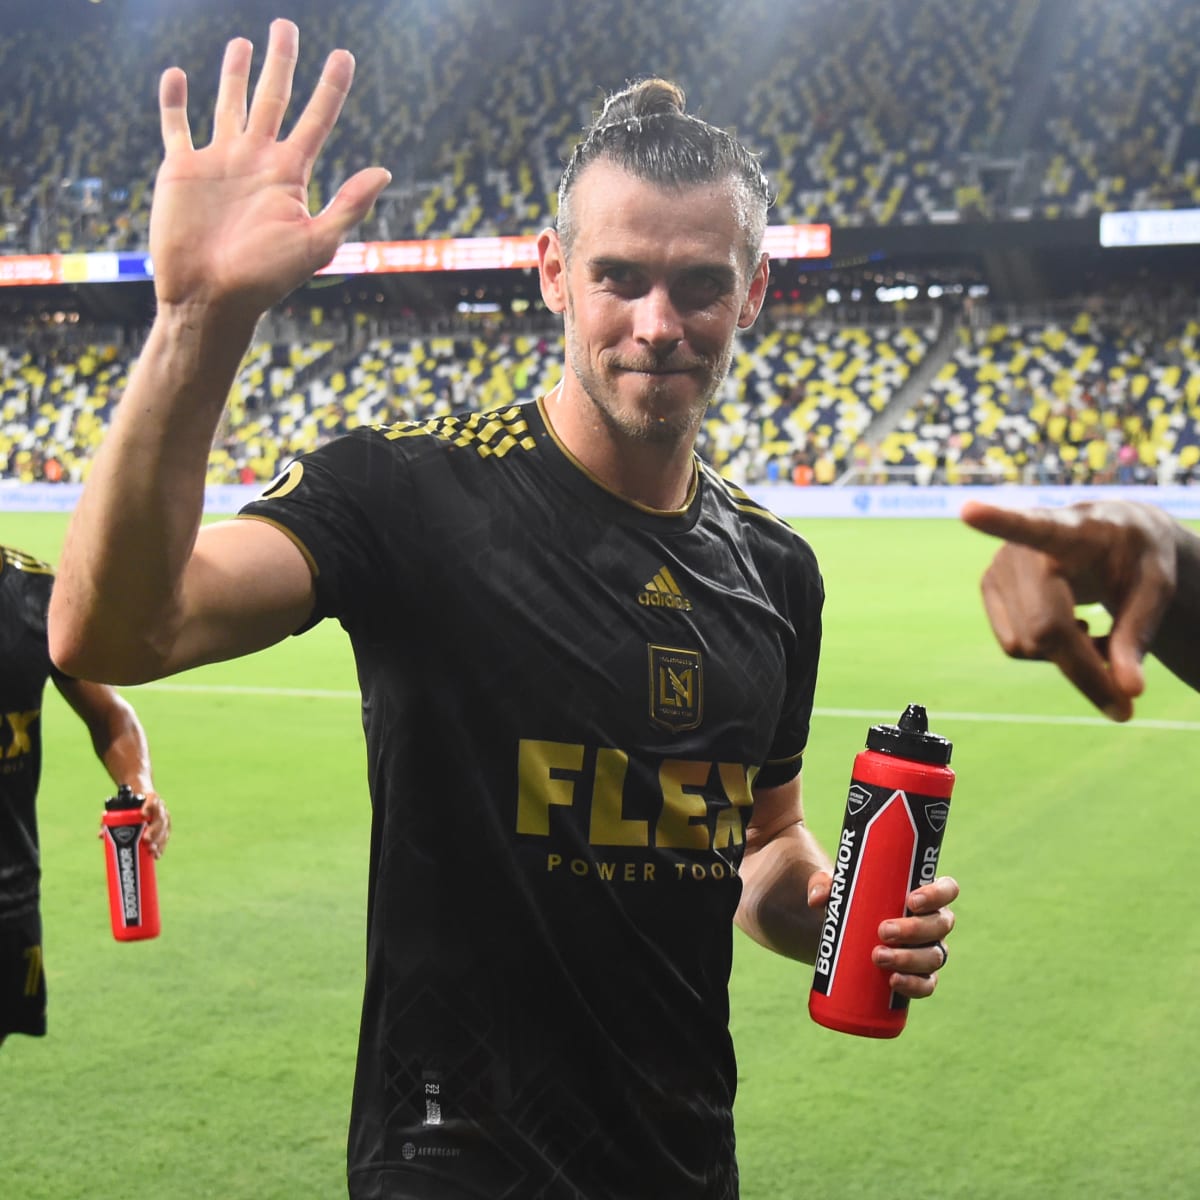 Gareth Bale Scores First Goal for LAFC to Seal Win (VIDEO